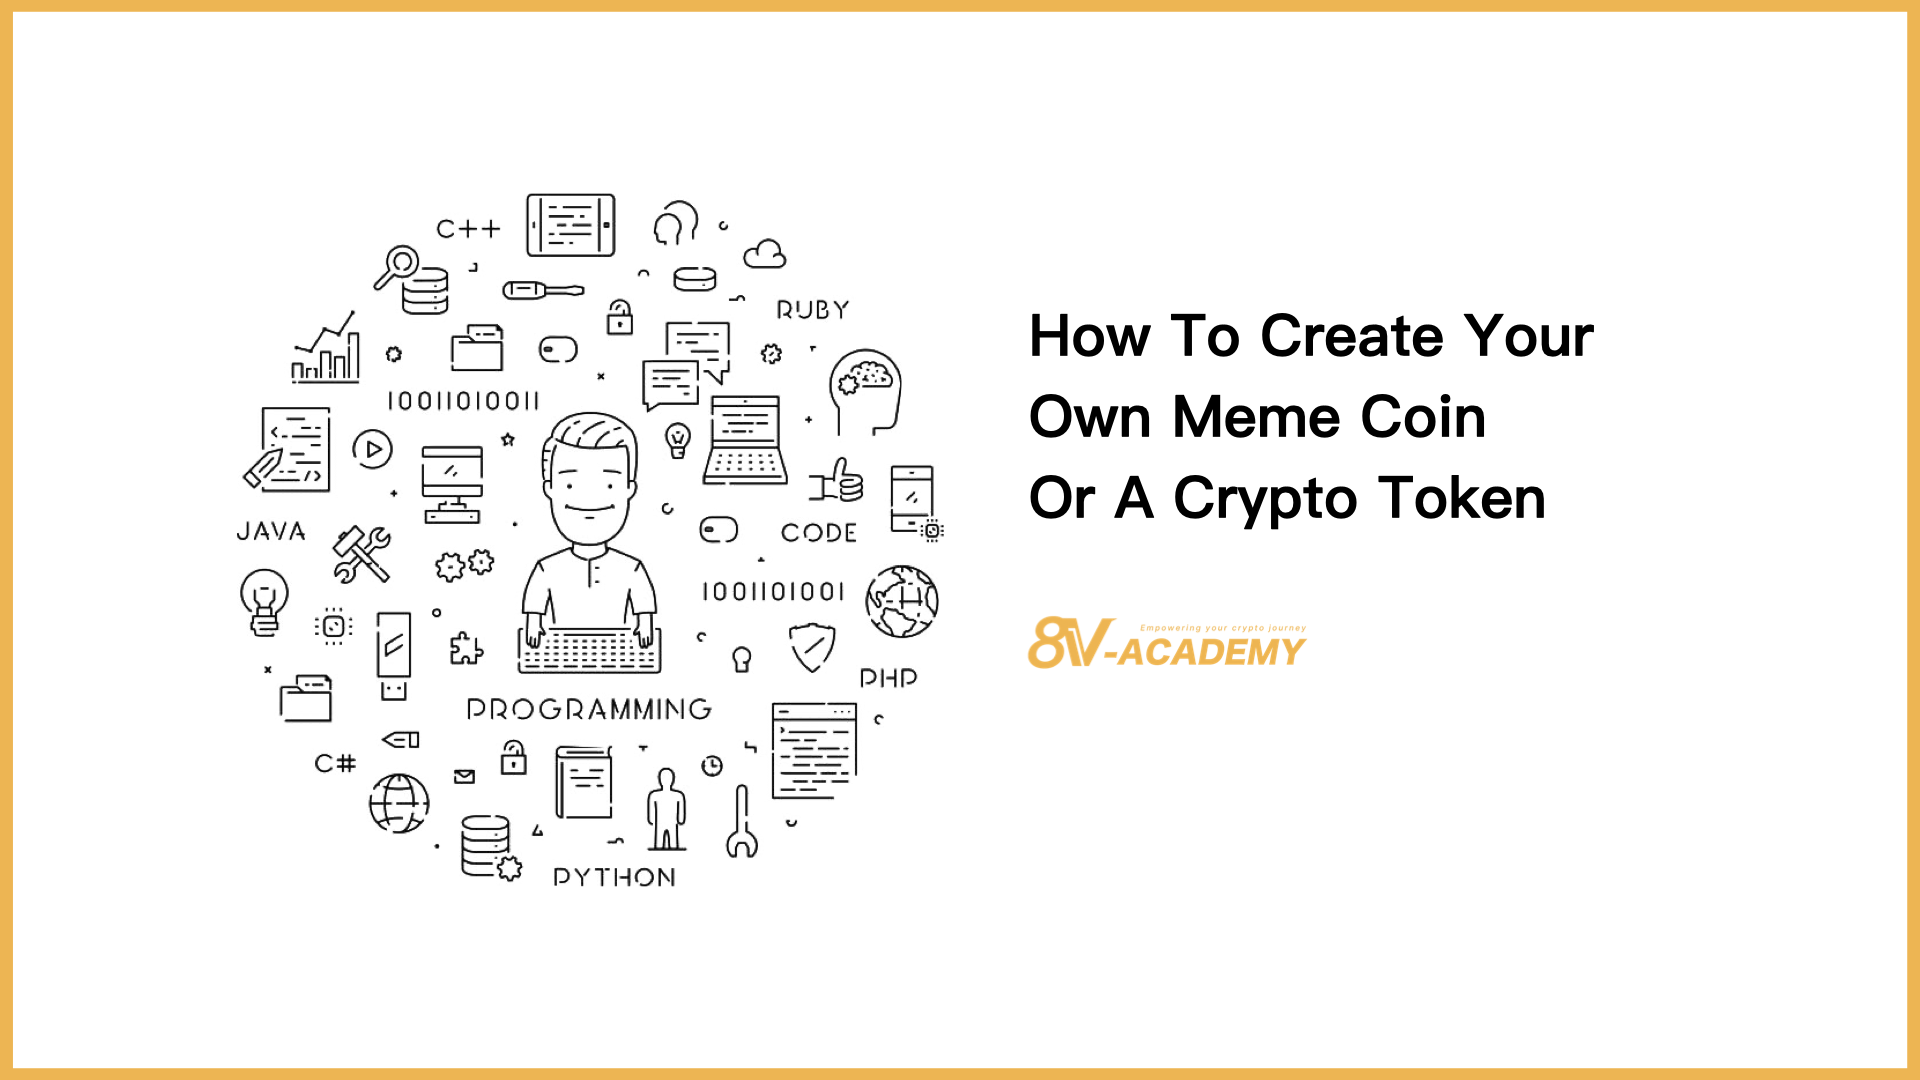 How to Create Your Own Meme Coin or A Crypto Token